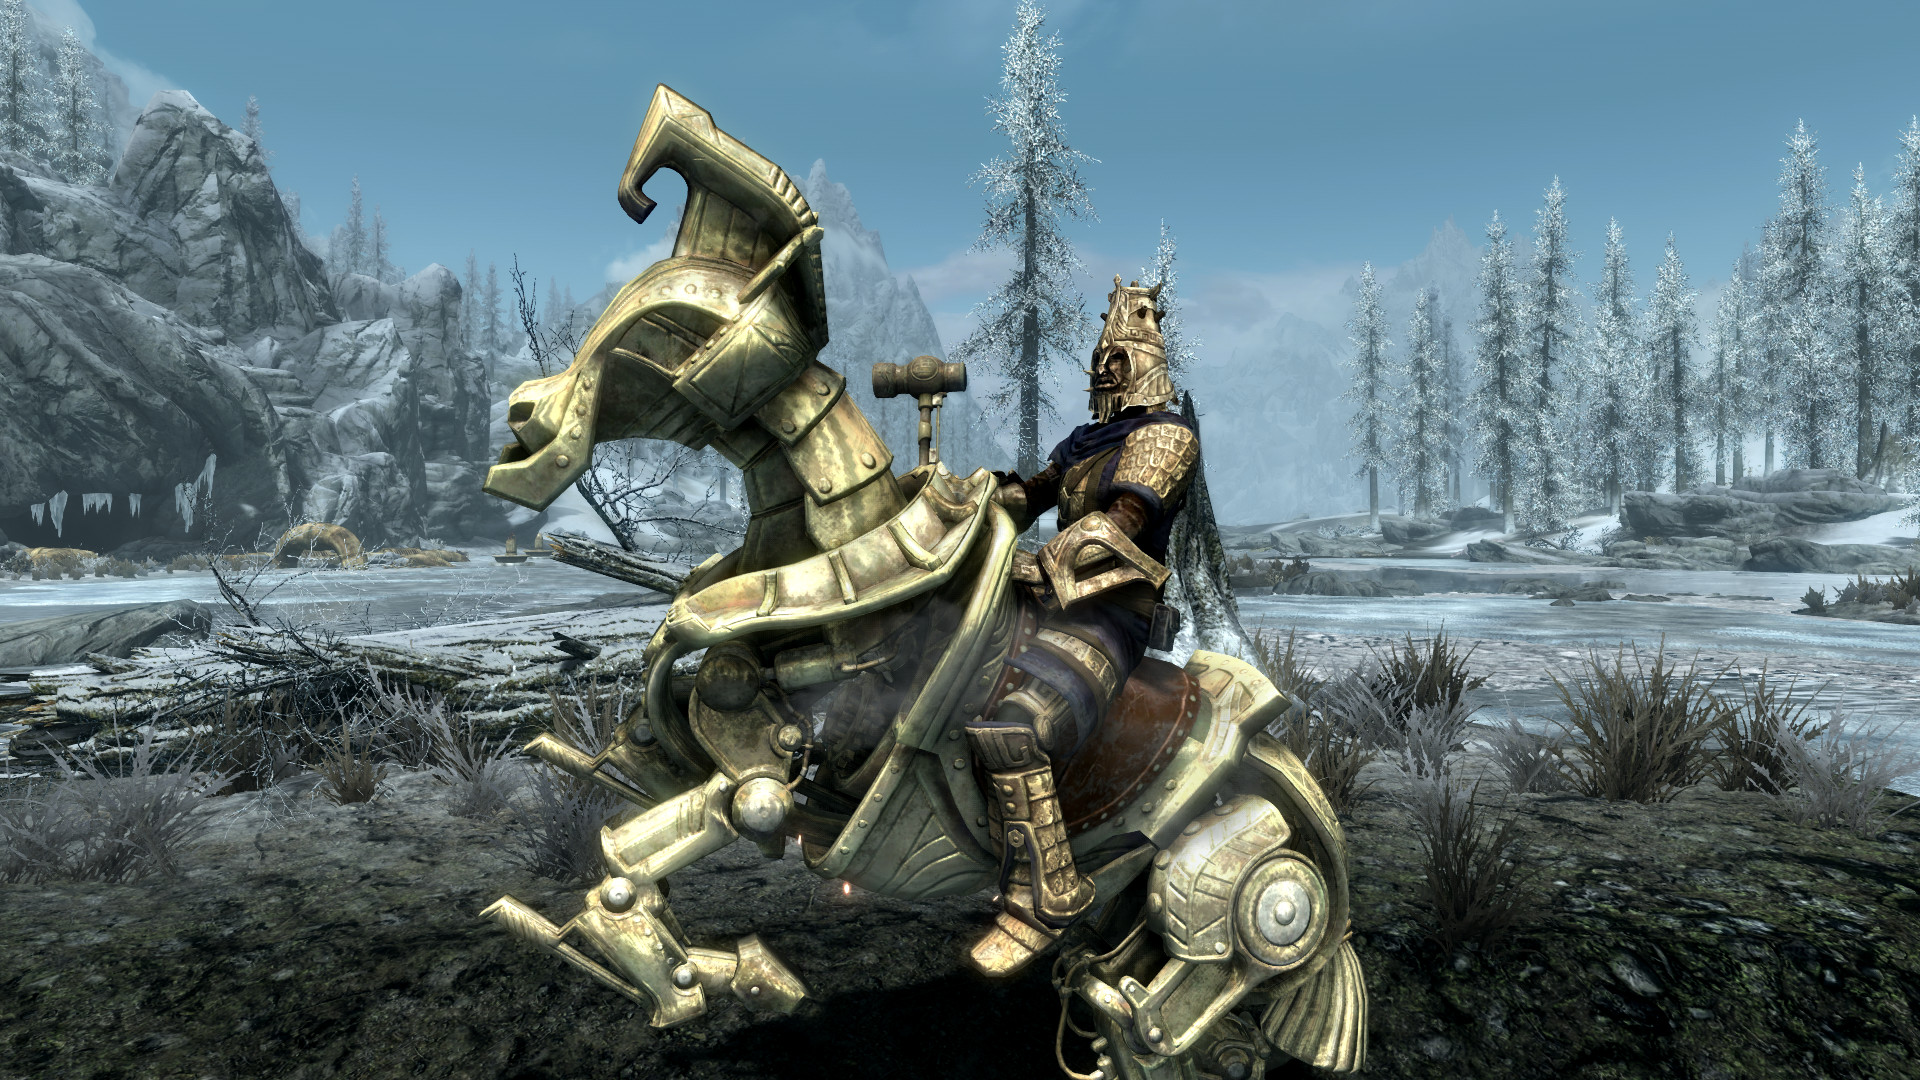 Skyrim how to increase carry weight?